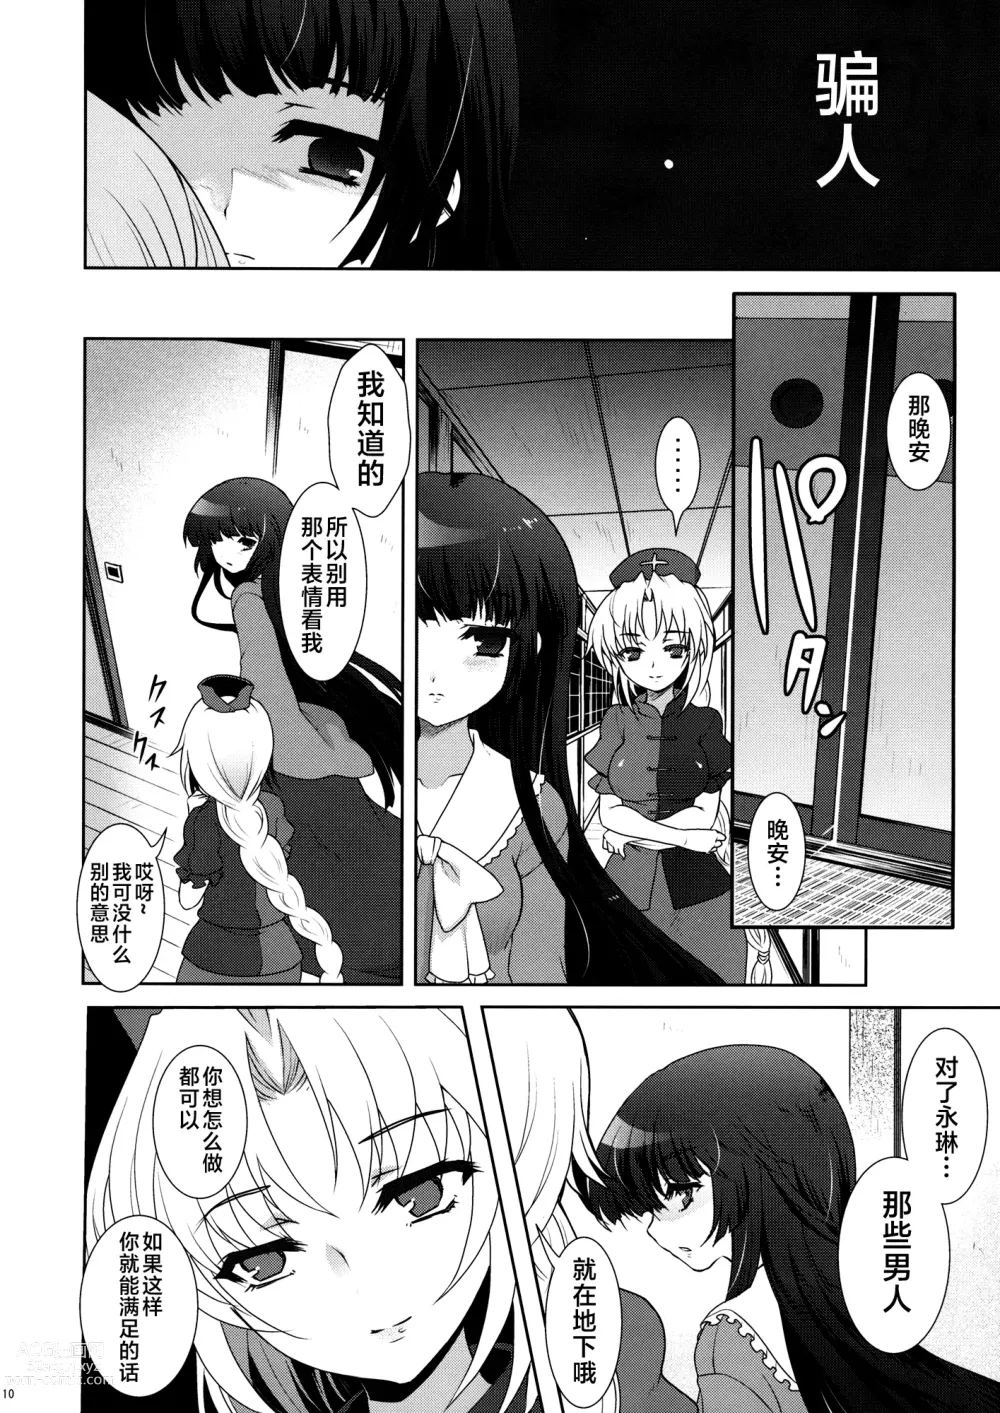 Page 10 of doujinshi Scapegoat Act: 2